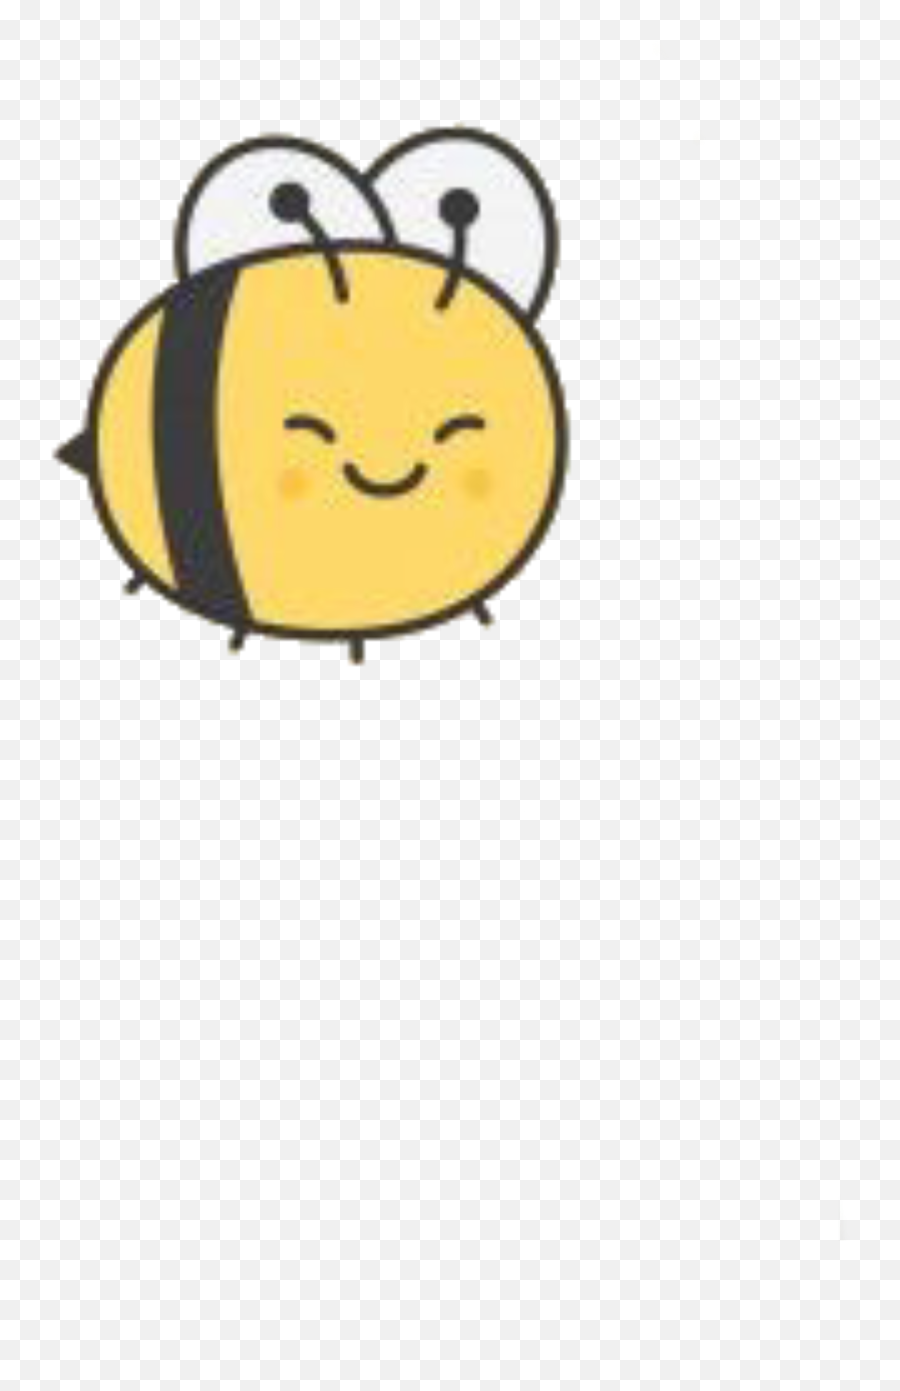 The Coolest Bee Animals Pets Images - Happy Emoji,Small Bee Heart Emoticon